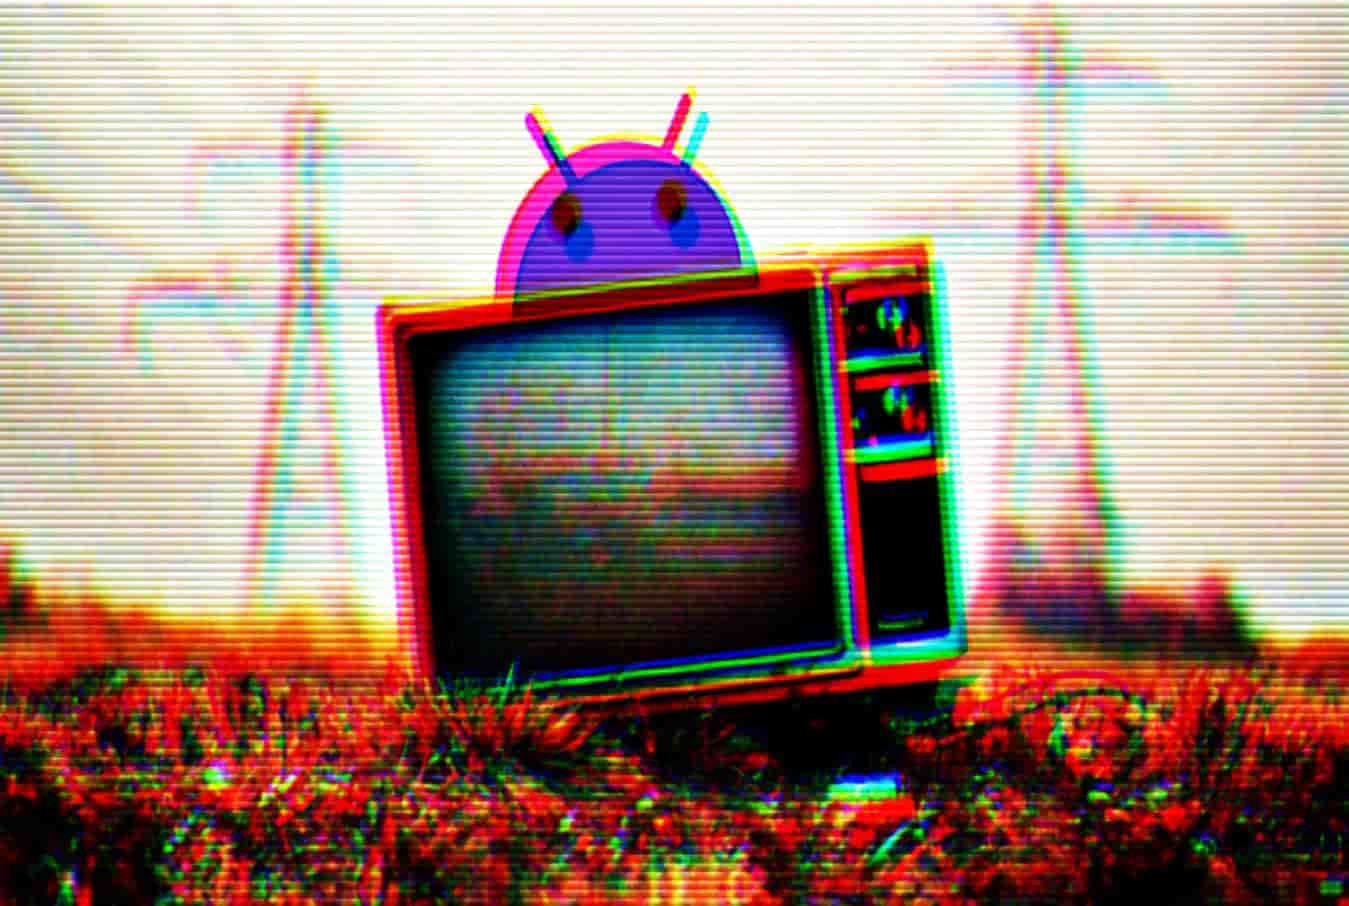 Hacked Android phones mimicked connected TV products for fake ad views